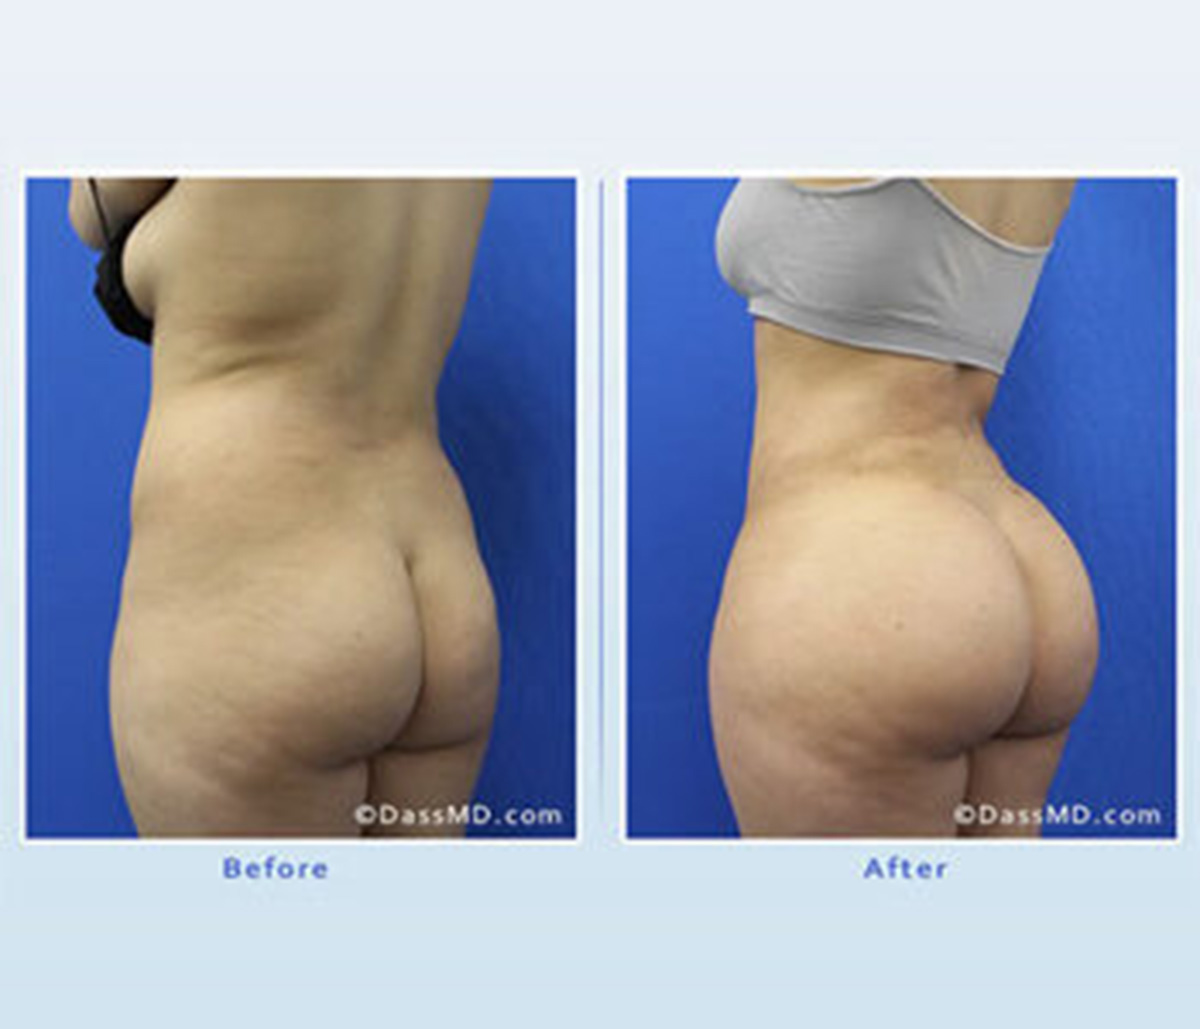 Brazilian Butt Lift Surgery Beverly Hills CA - What To Expect